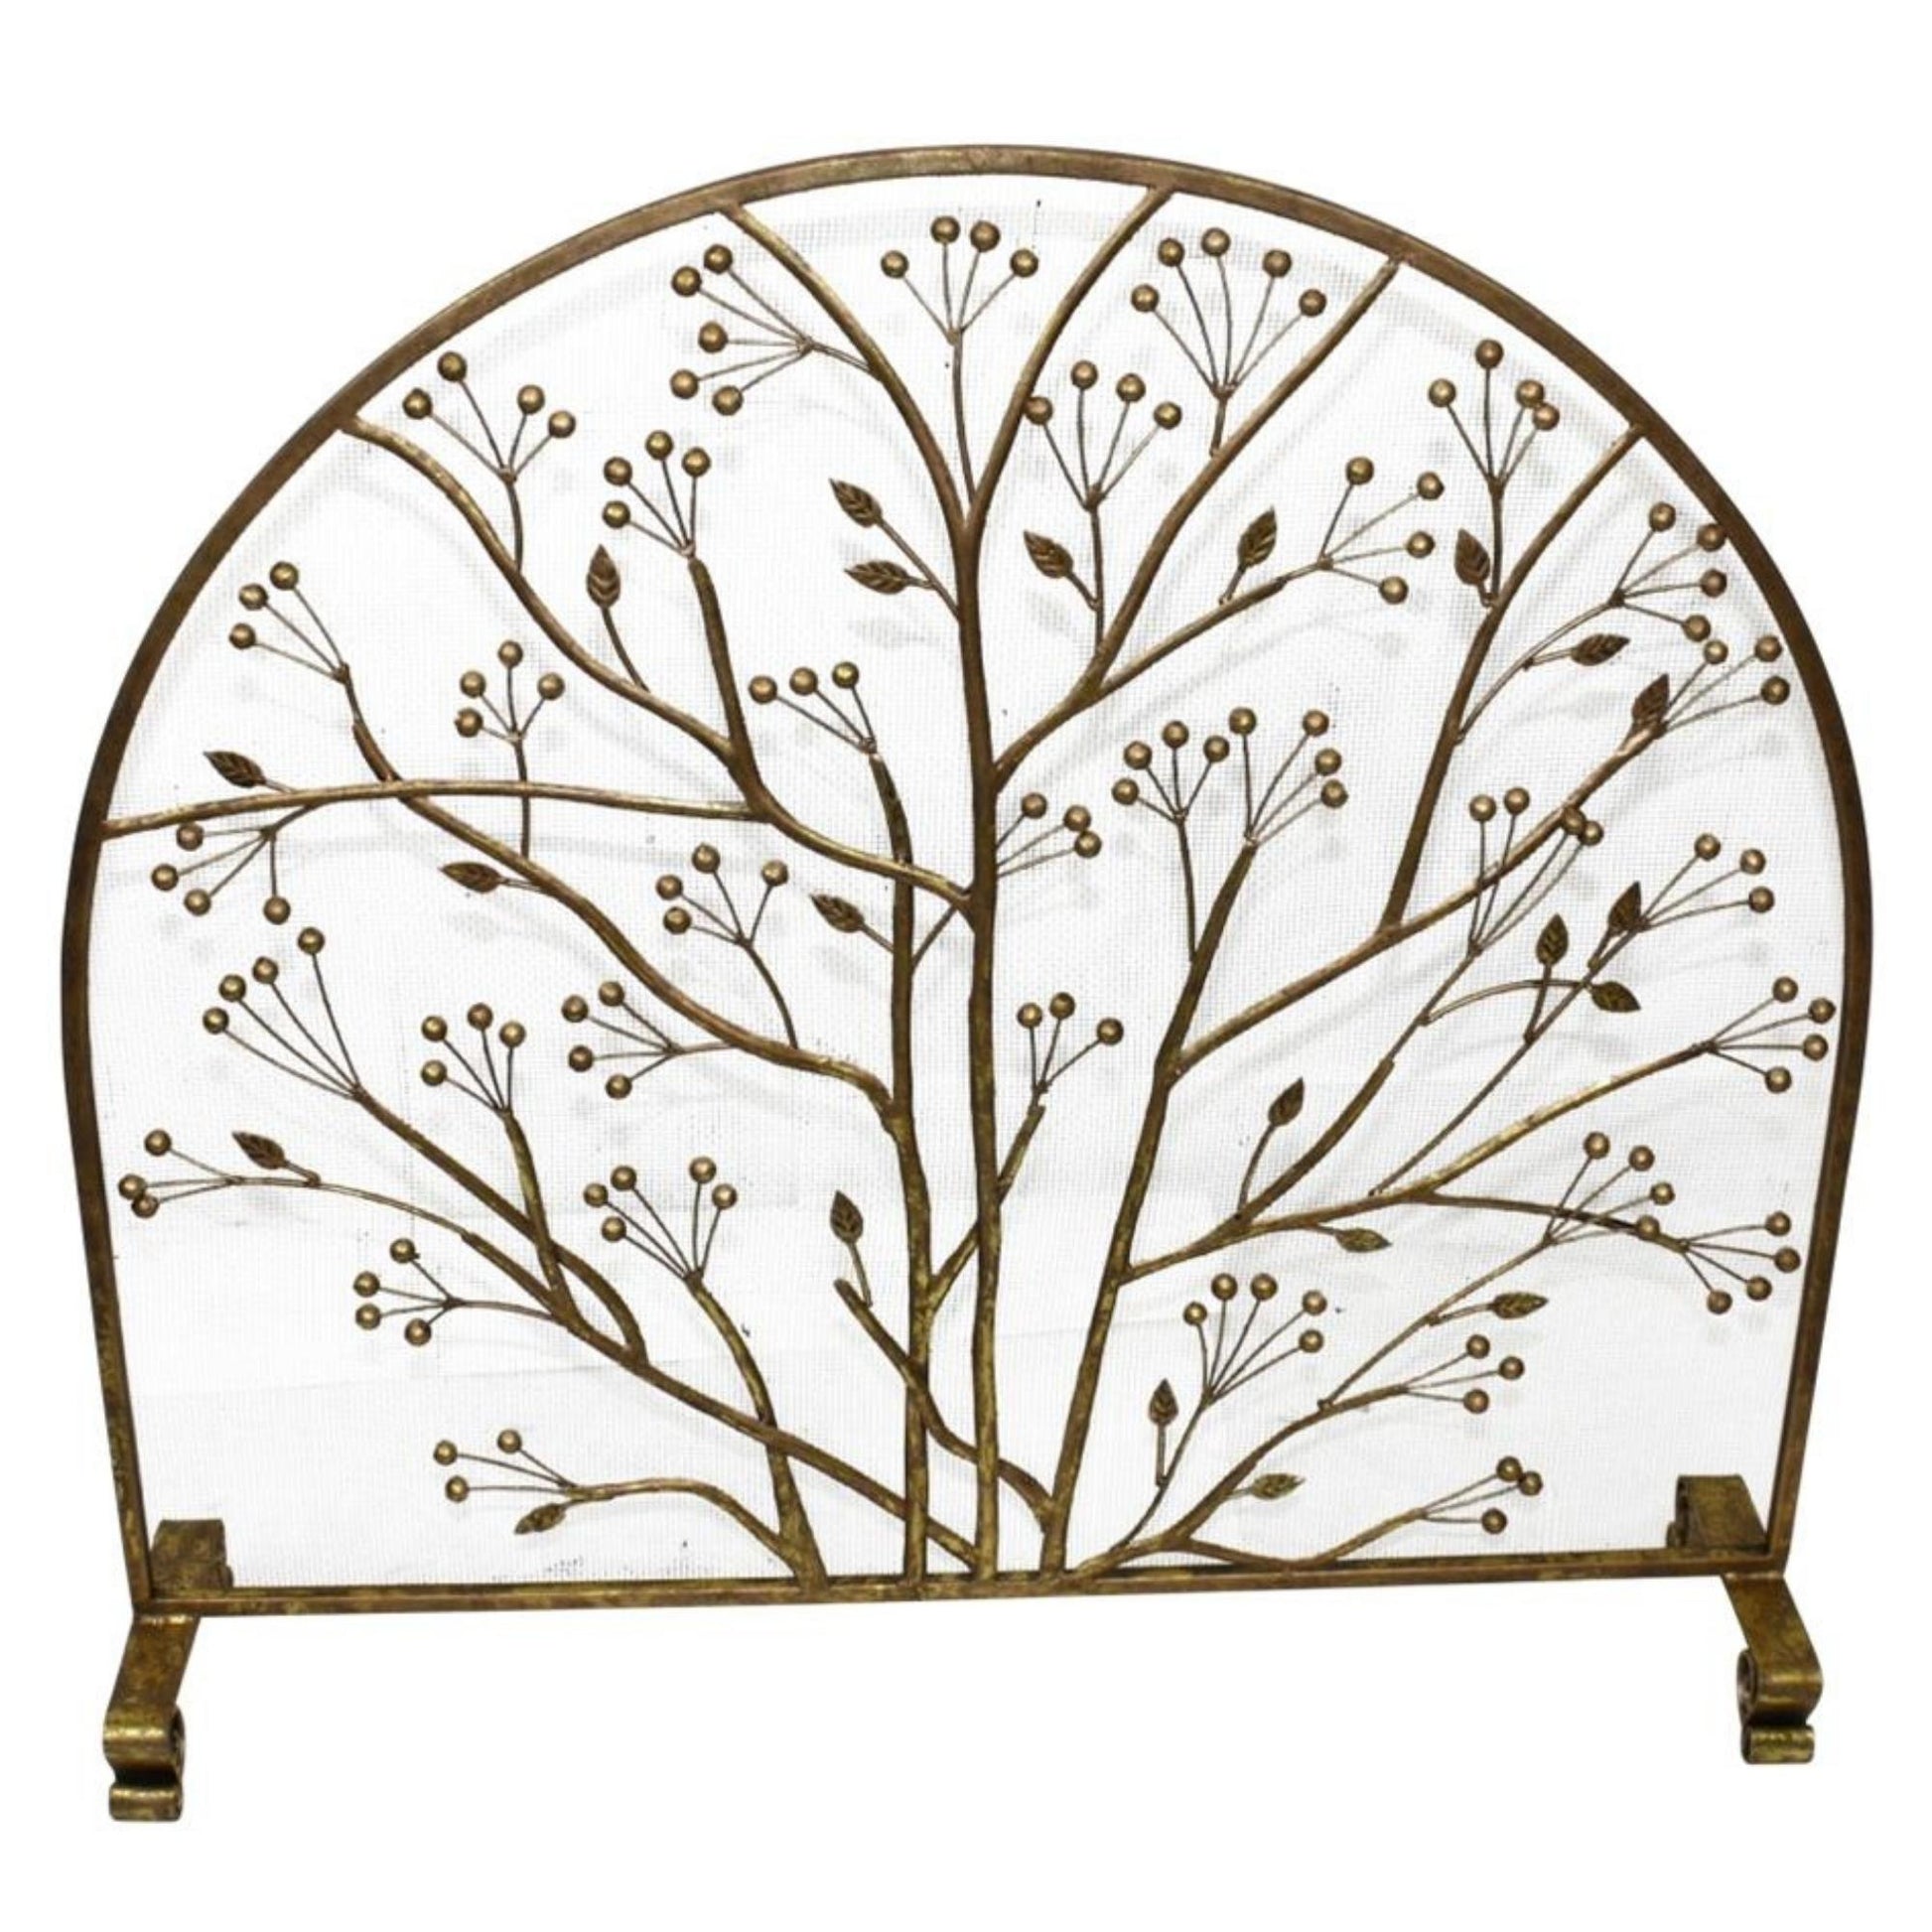 Branch and Berry Nature Inspired Fireplace Screen with Arched Top - Single Panel Iron Fire Screen | InsideOutCatalog.com